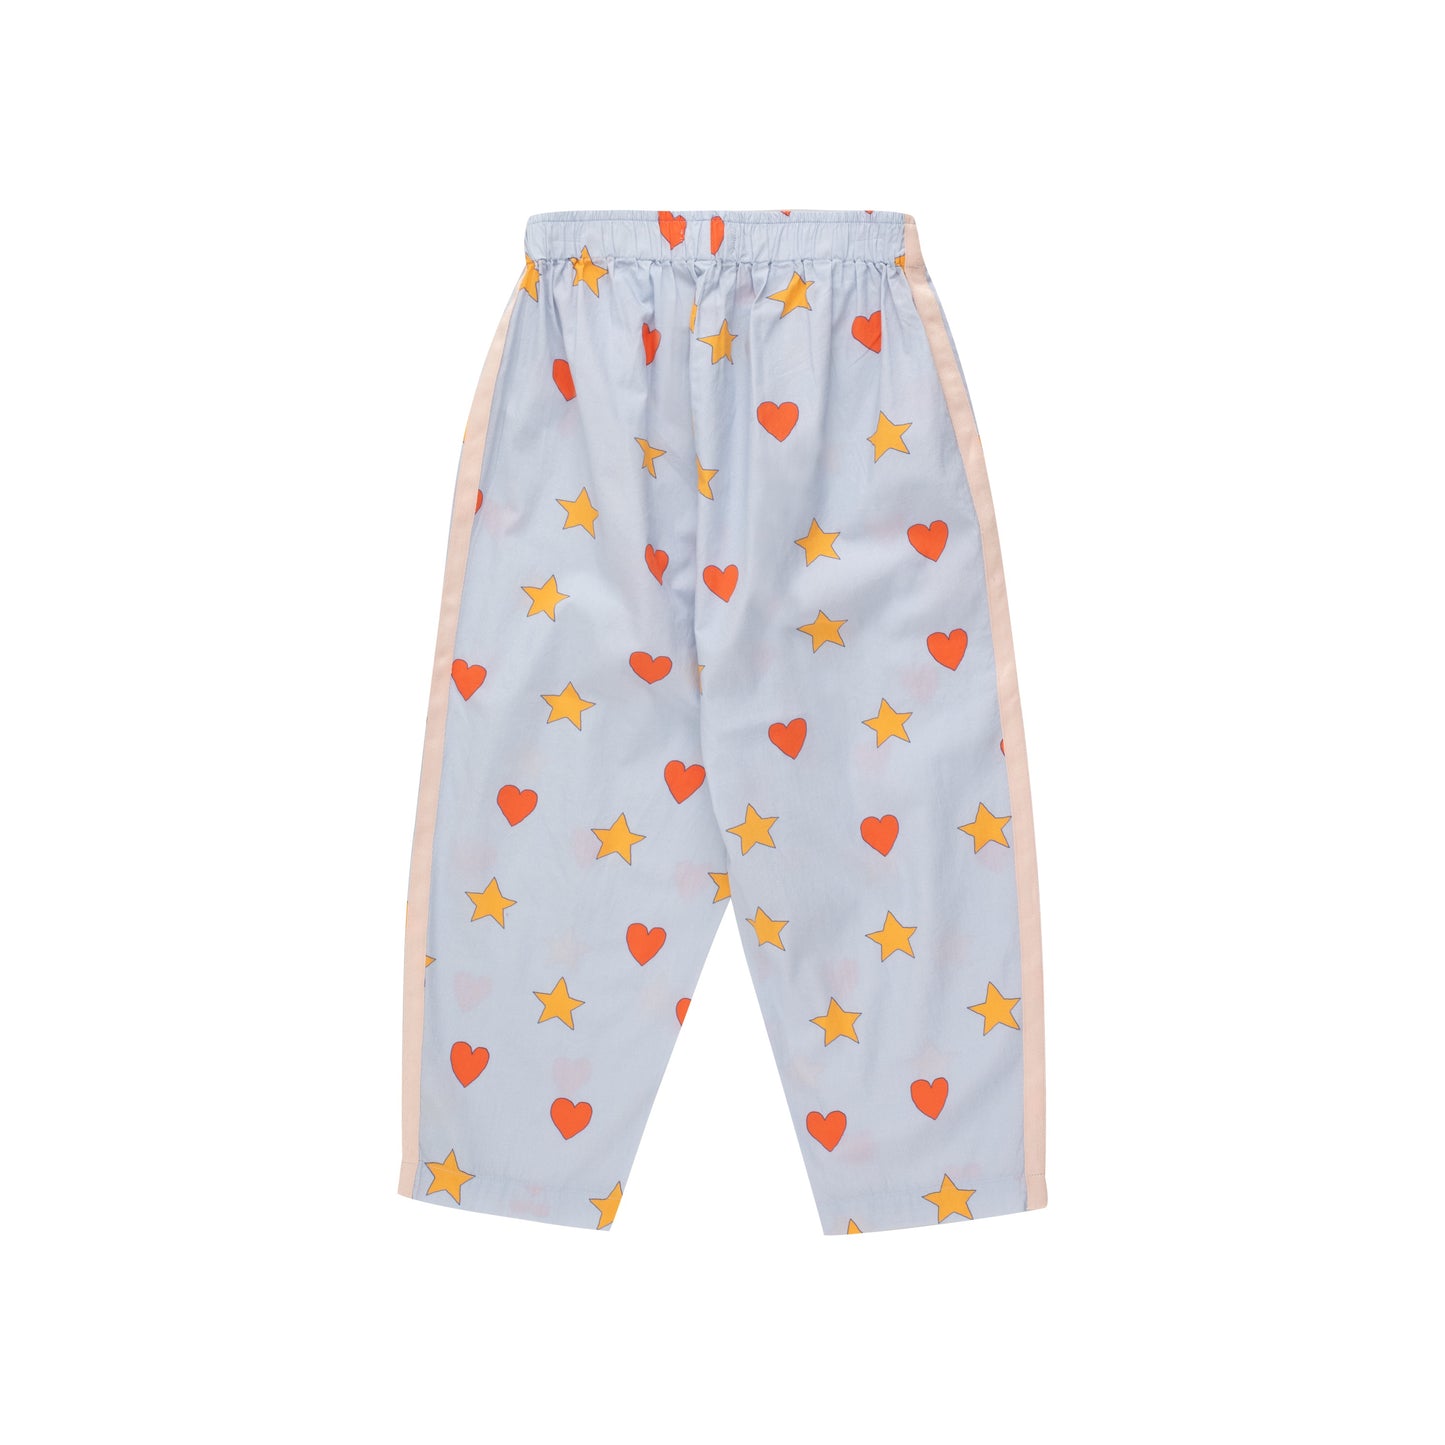 TINYCOTTONS Hearts Stars Pant ALWAYS SHOW